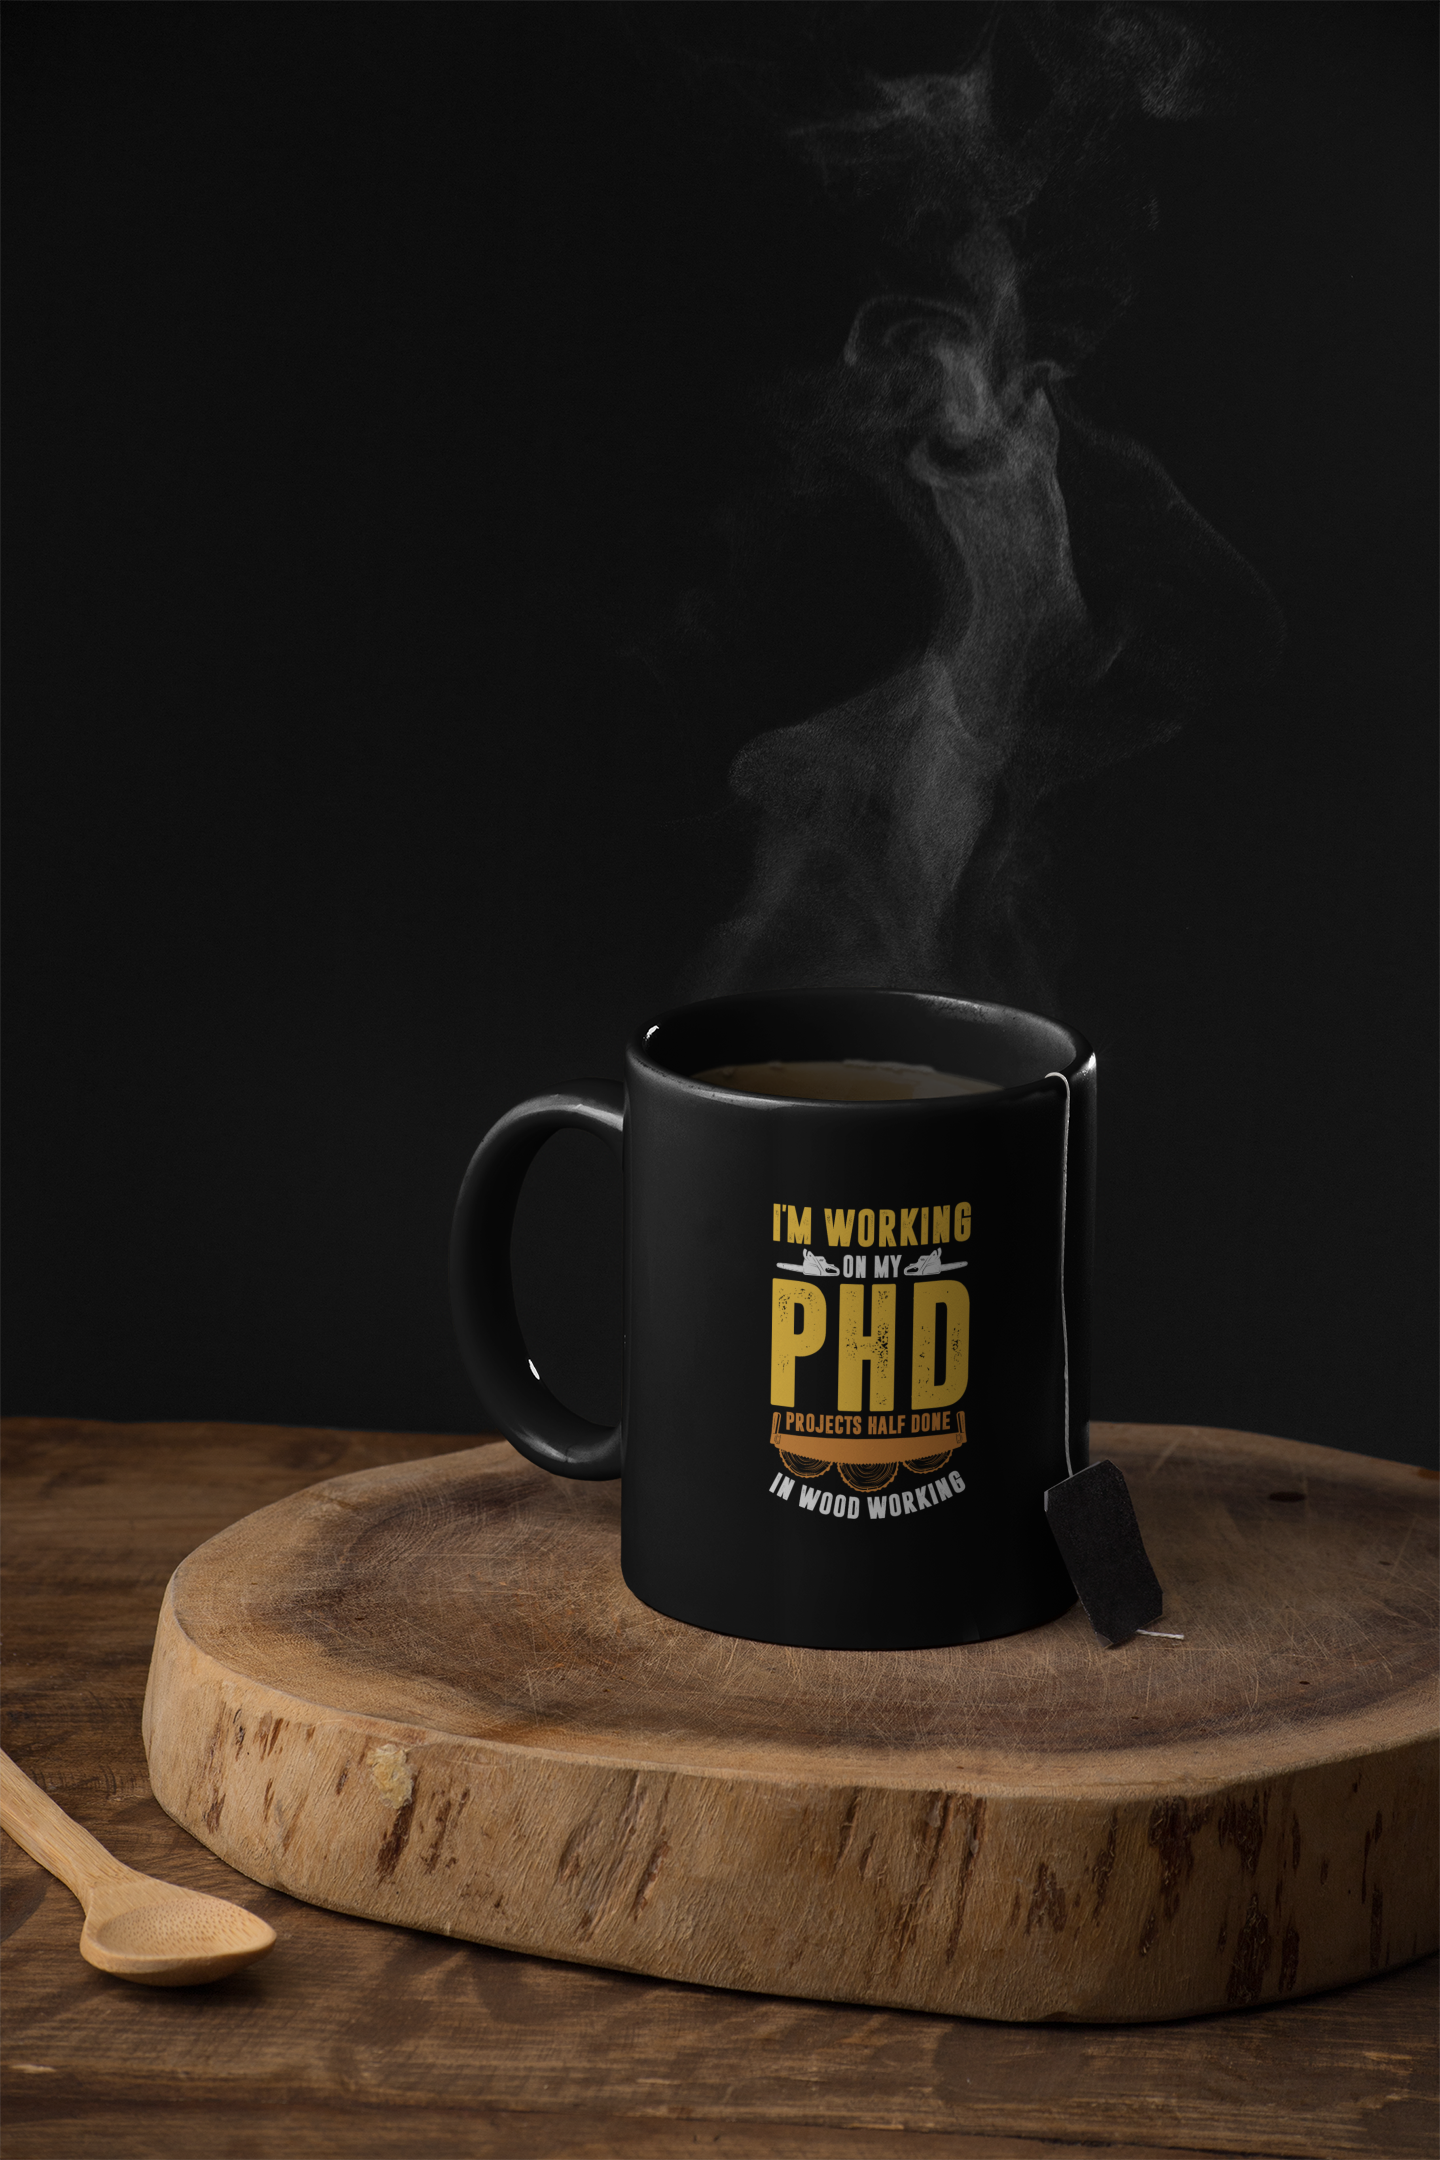 I'm Working On My PHD - Projects Half Done In Woodworking Mug